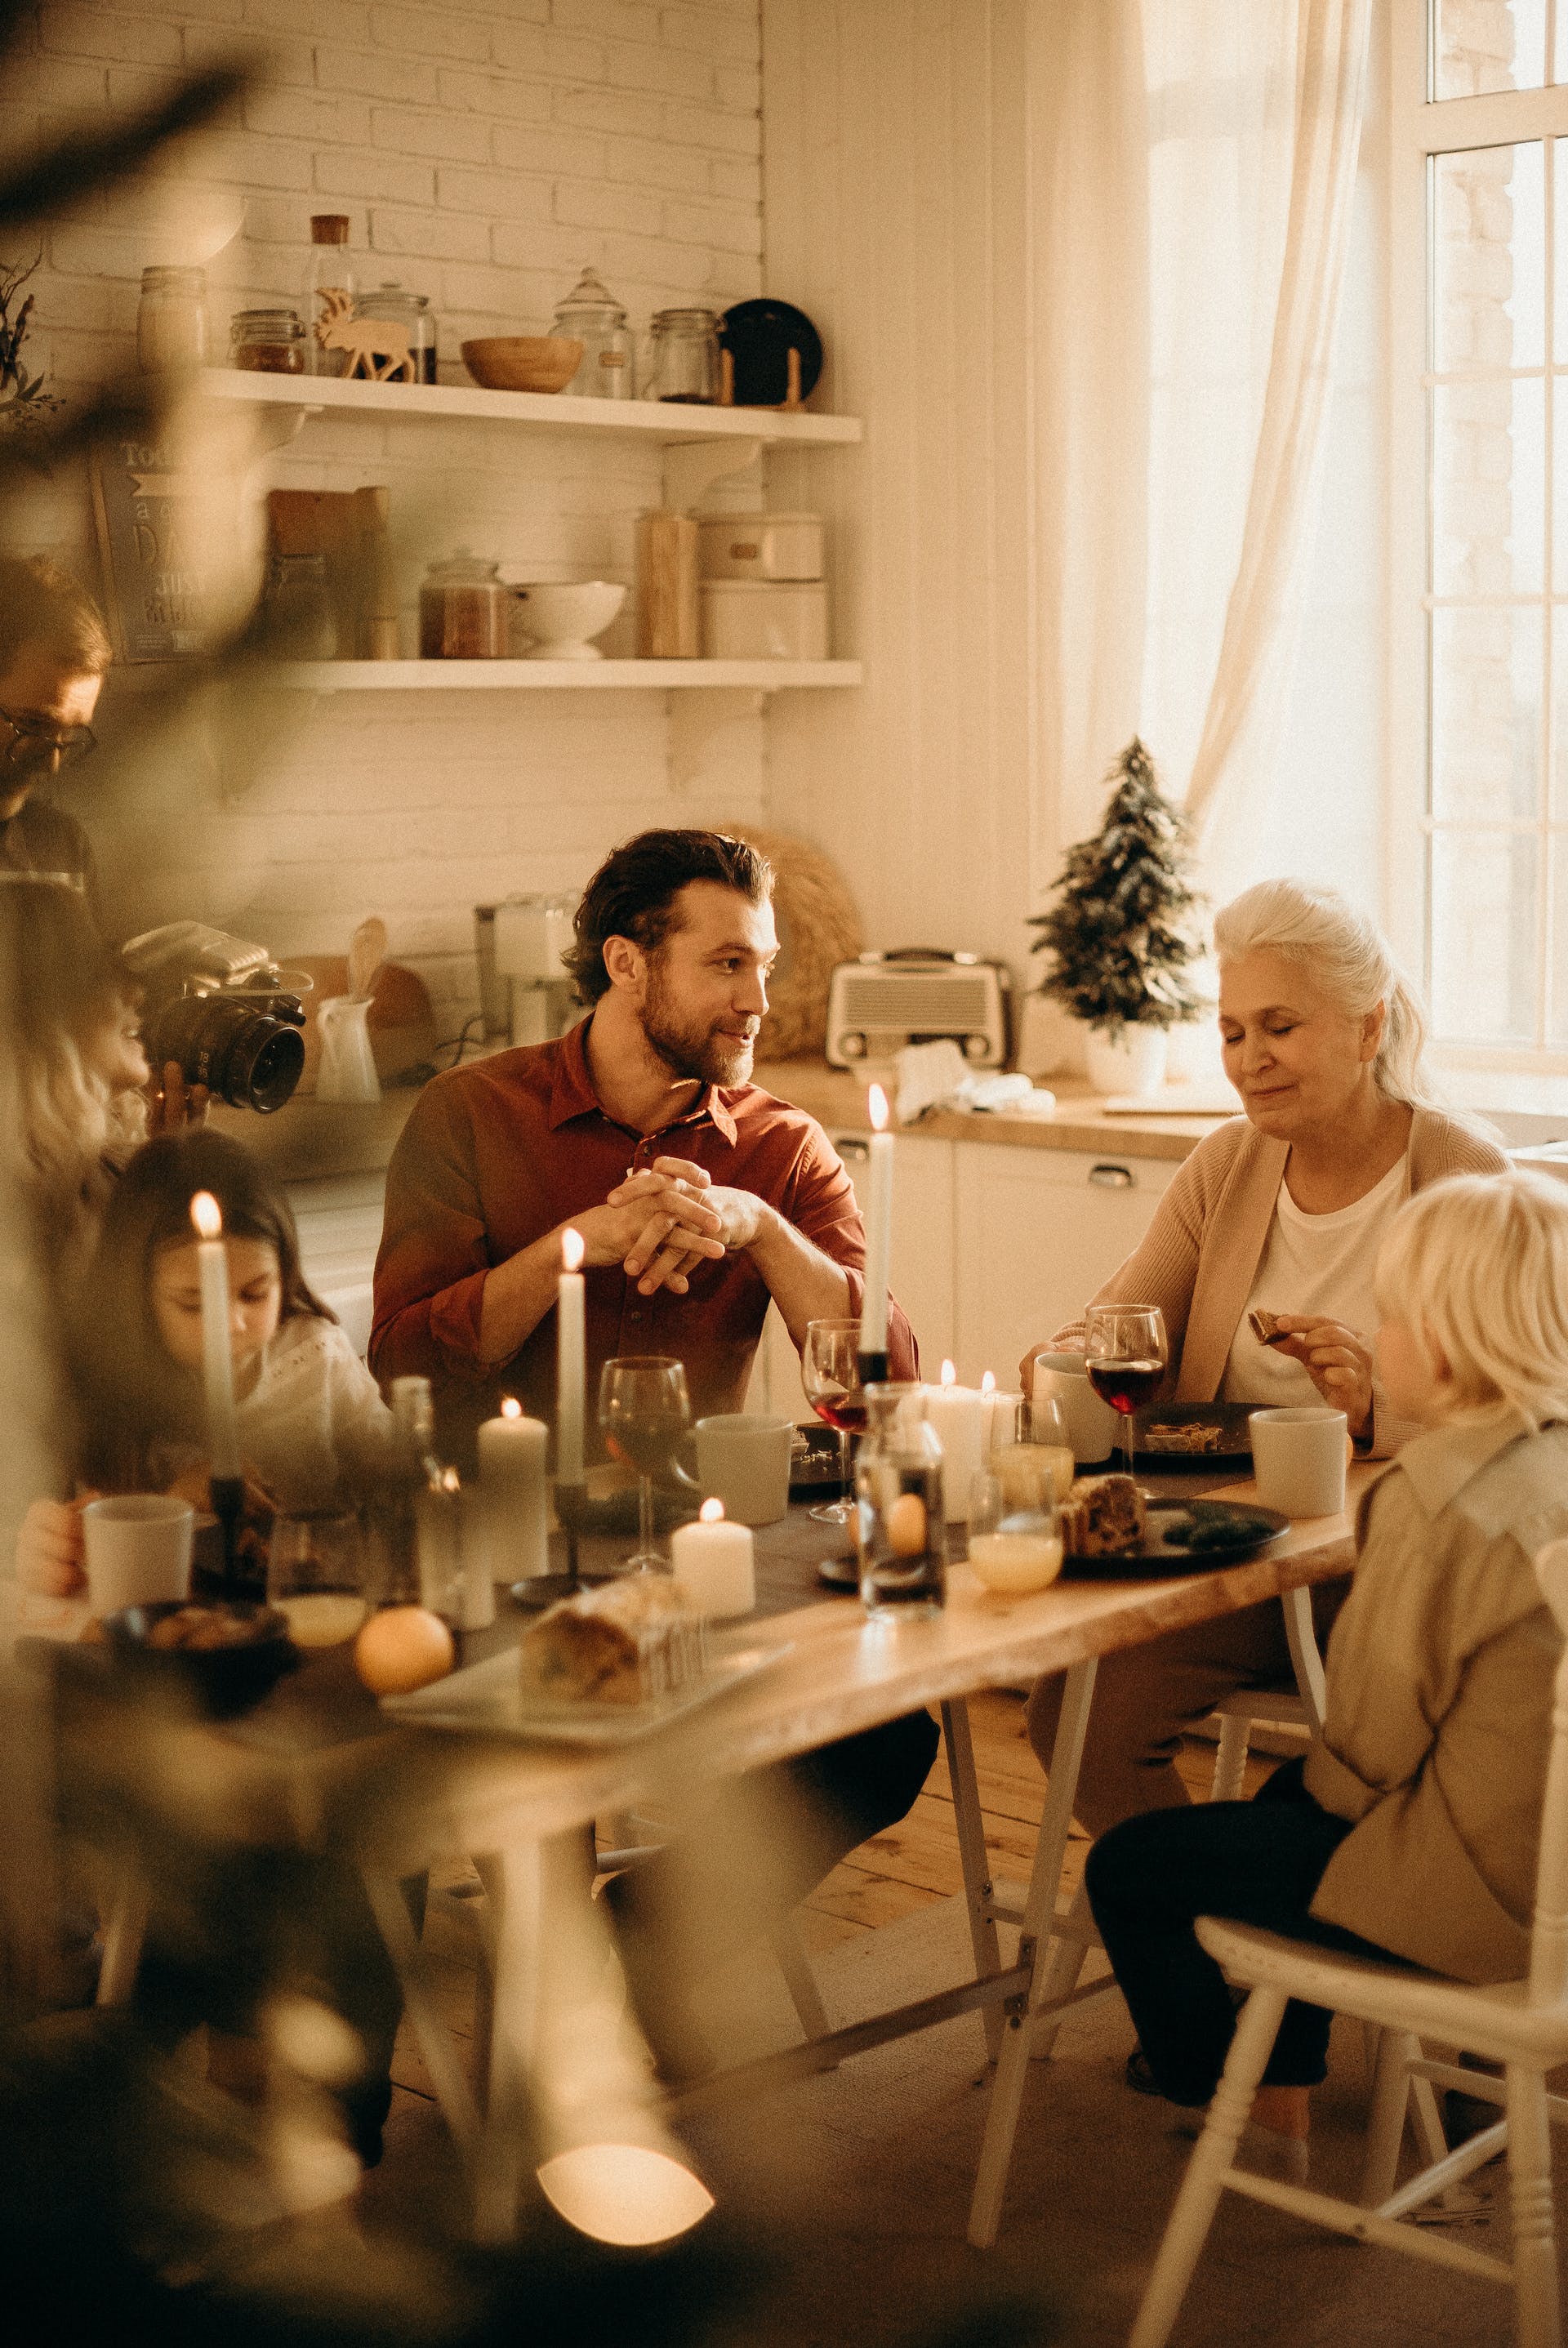 A family sitting at the dinner table | Source: Pexels